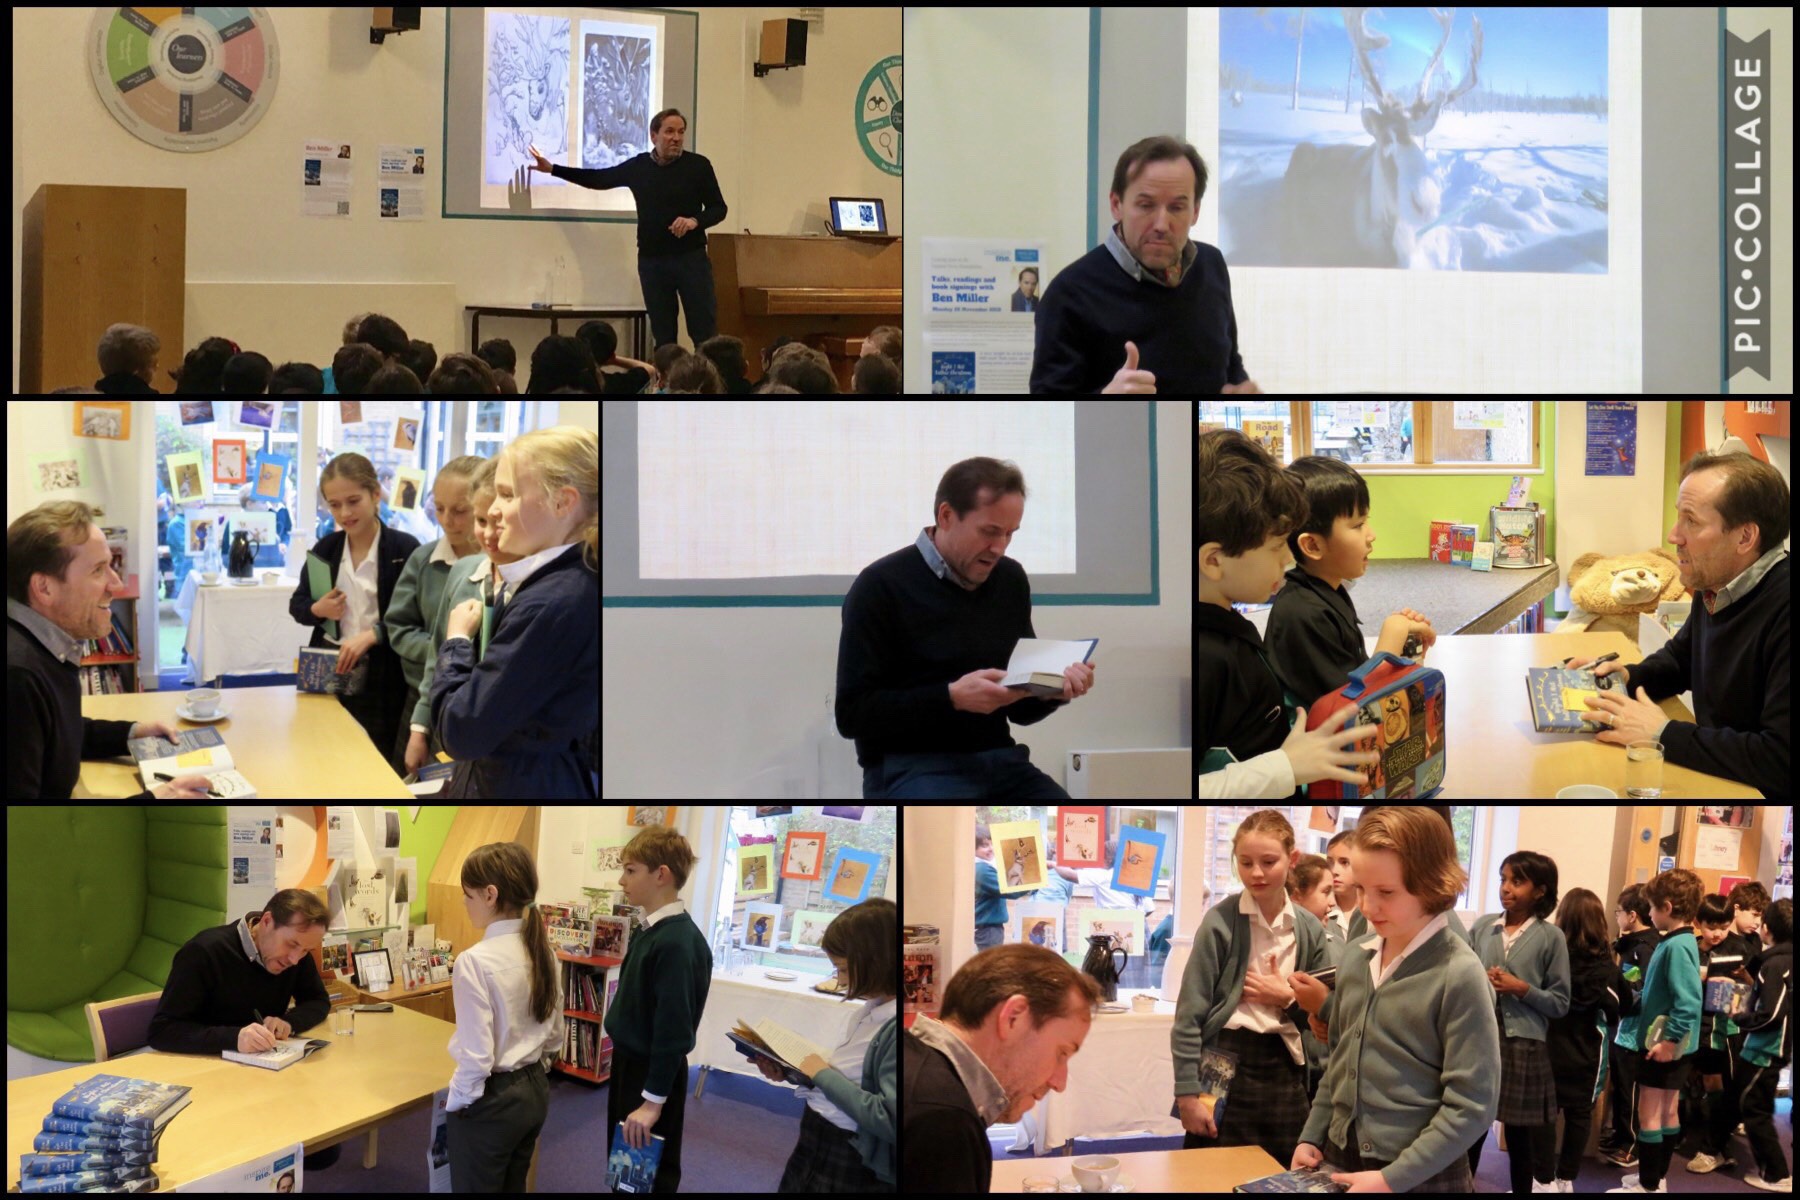 A photo collage of Ben Miller's visit to the Junior School